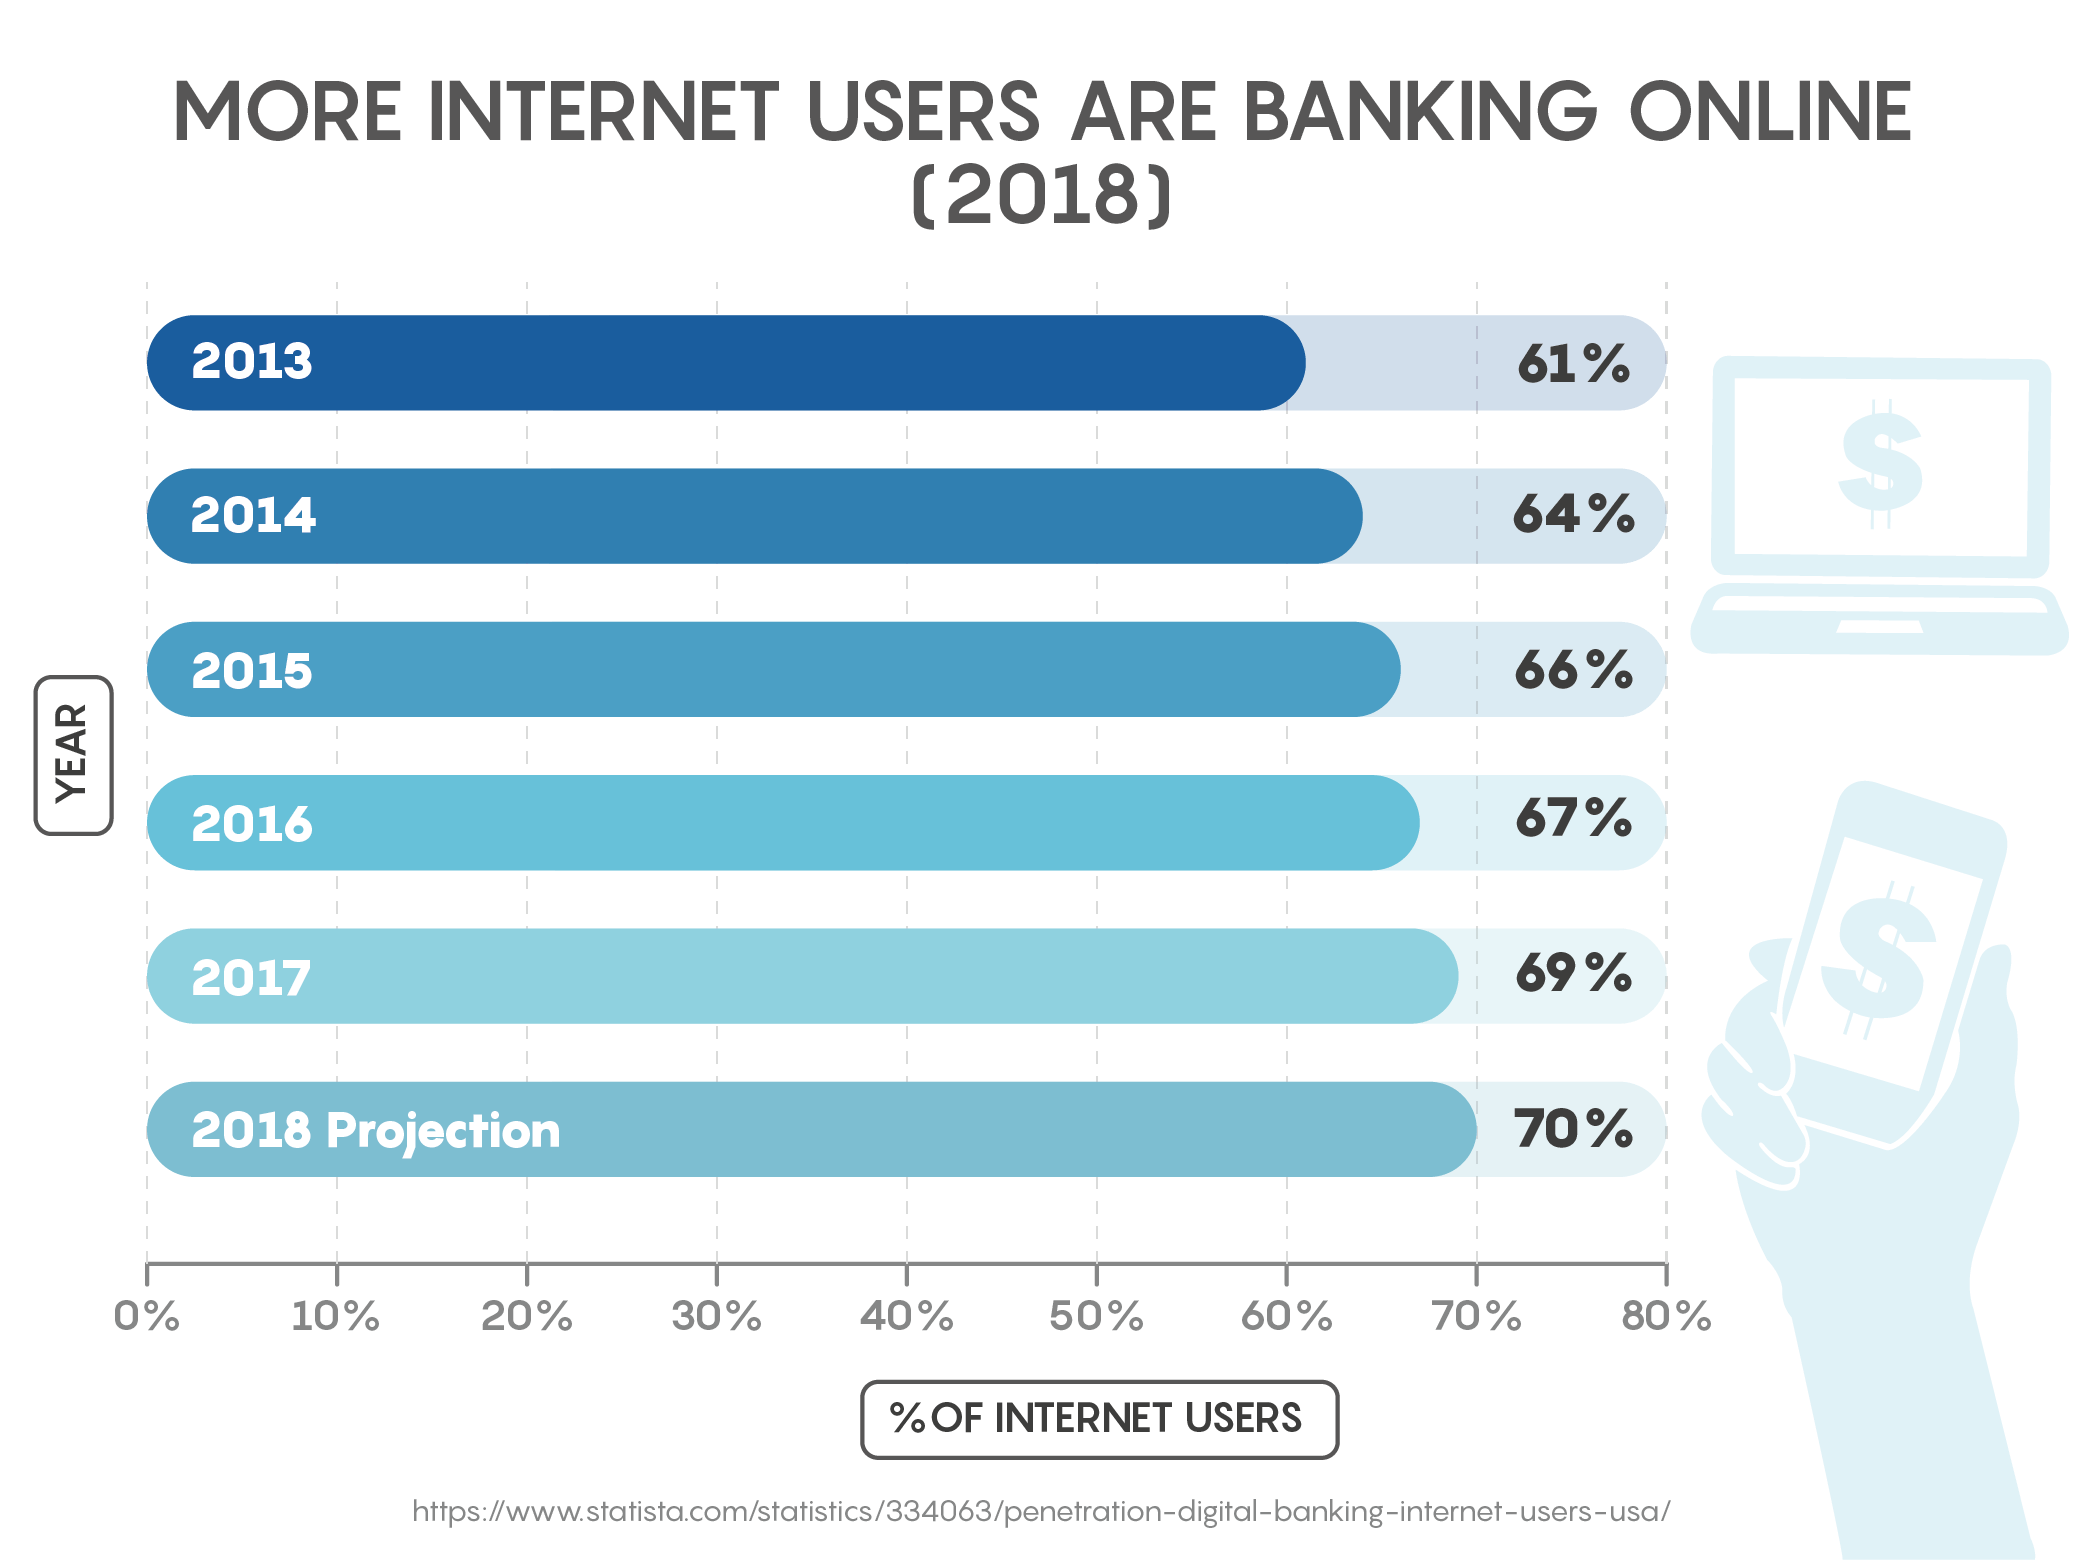 More Internet Users are Banking Online (2018)